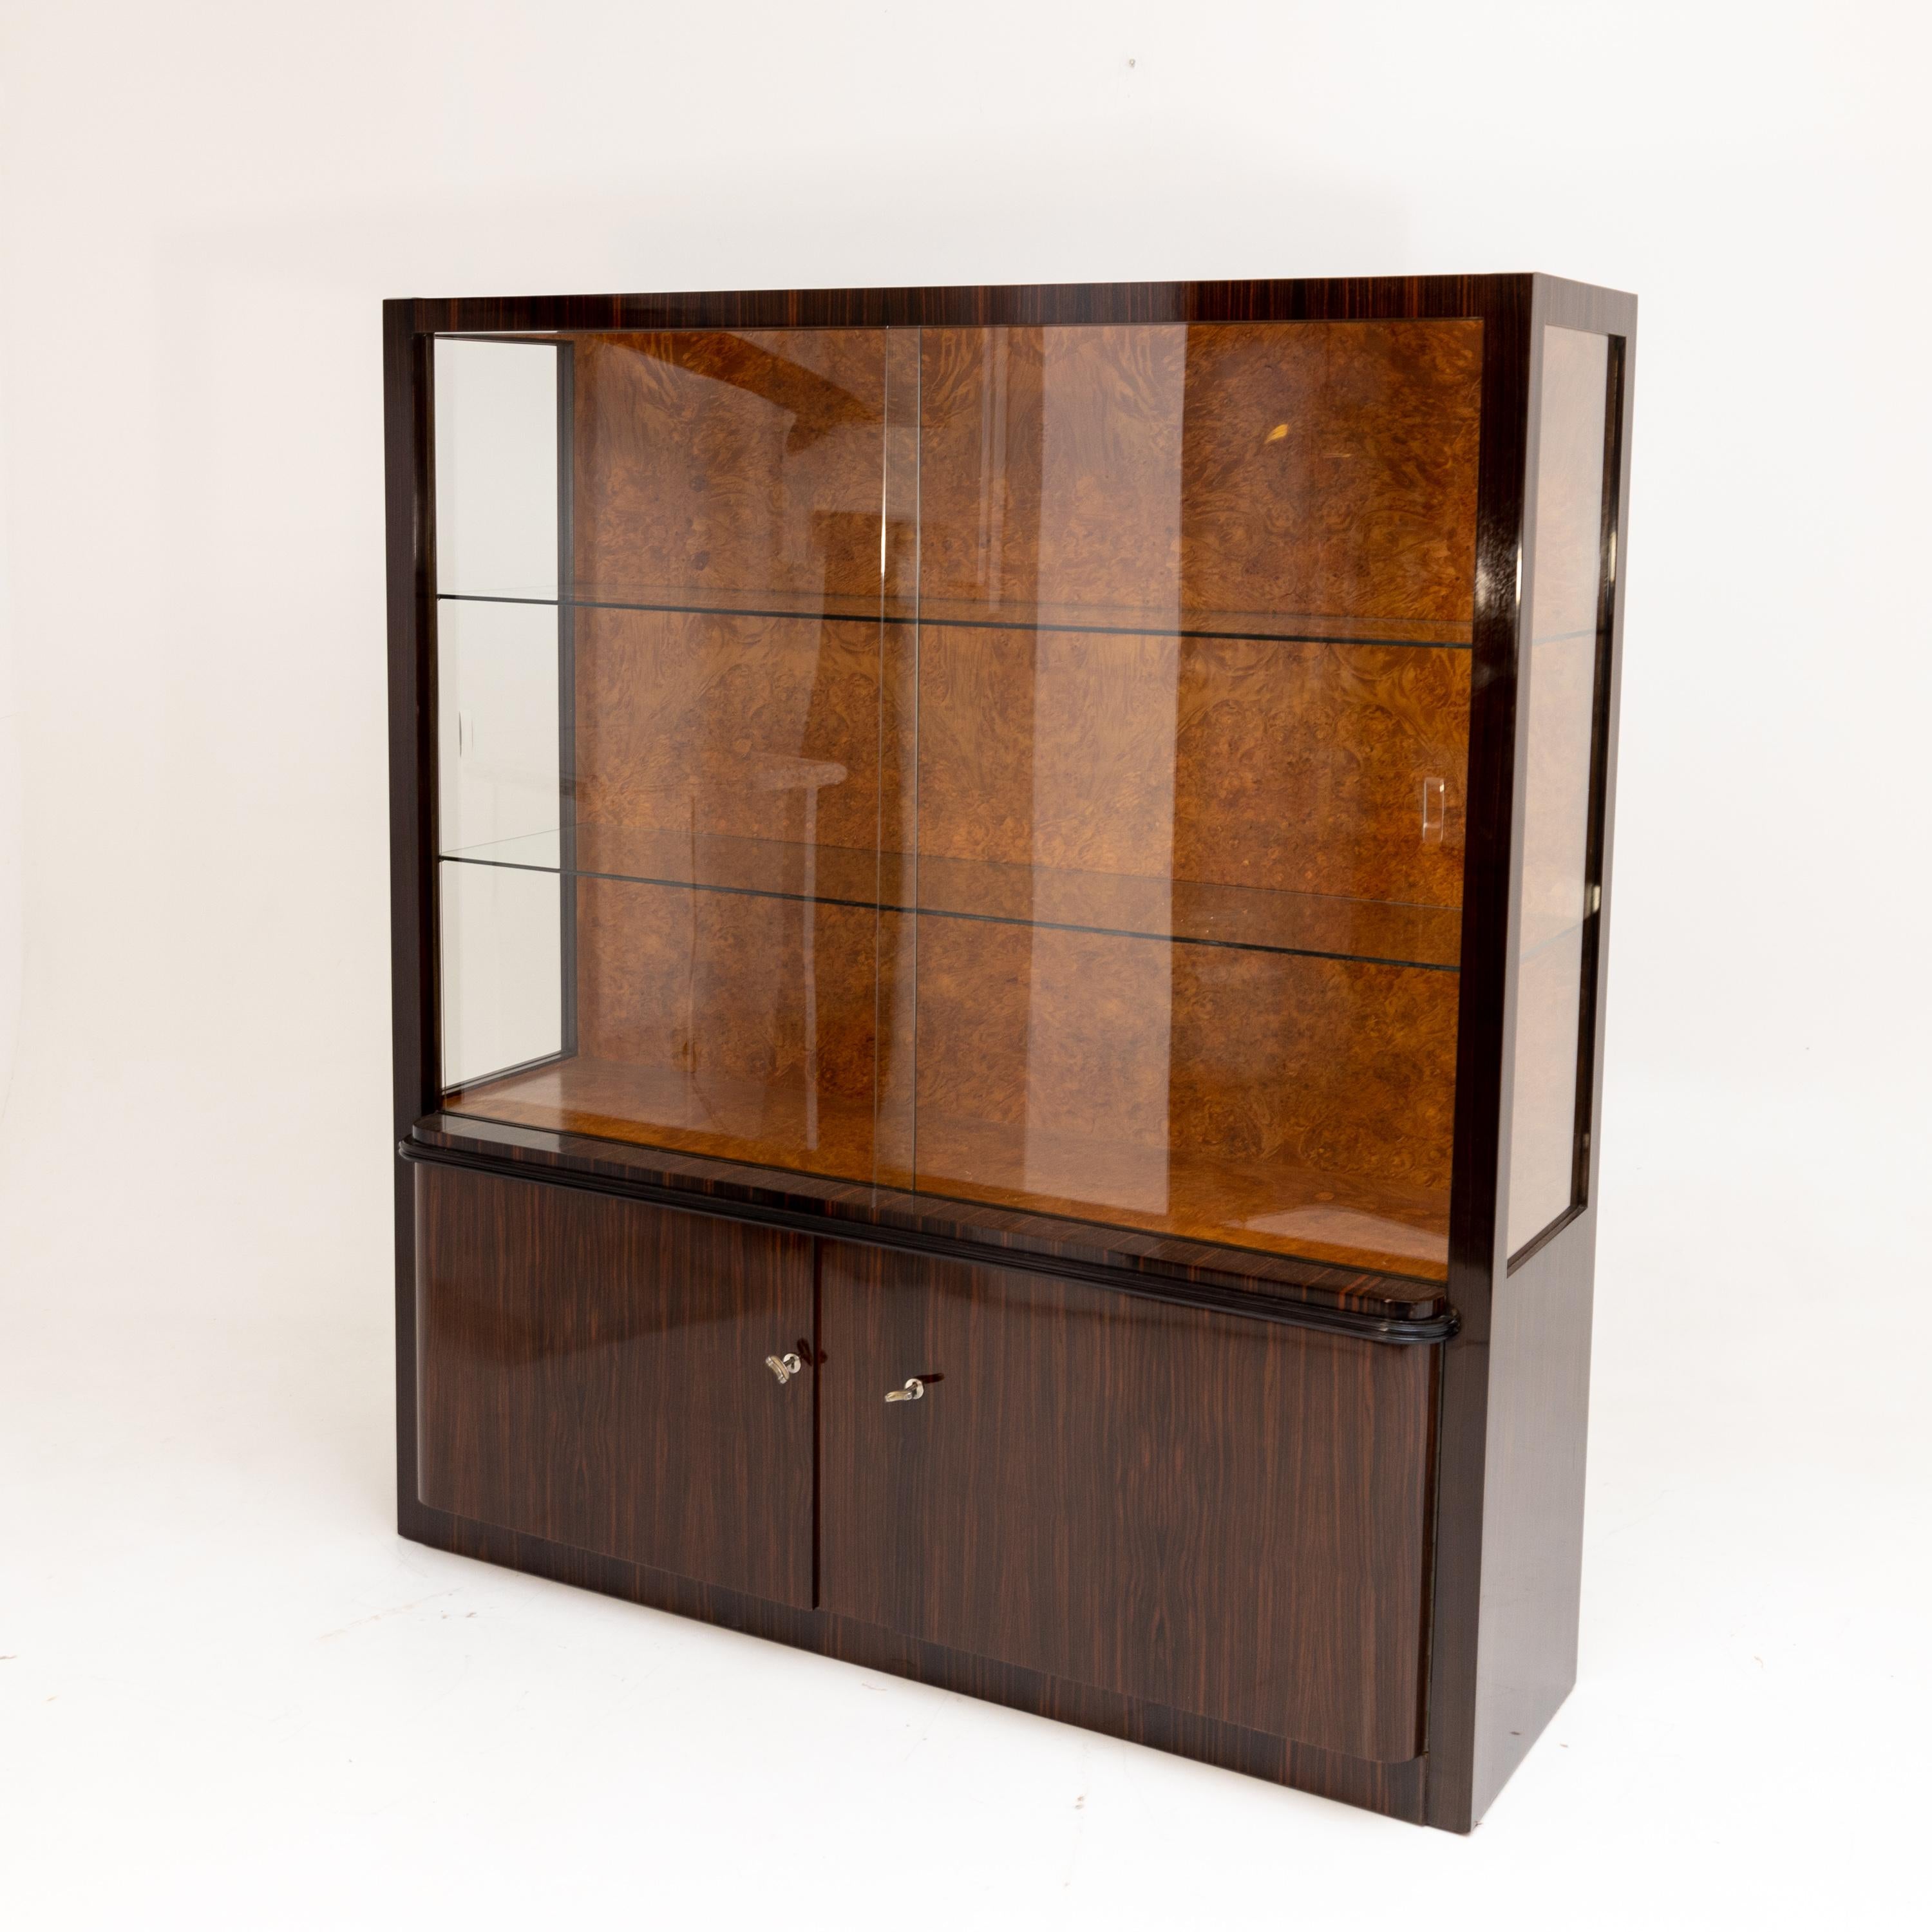 Large display case in the style of Bruno Paul, Deutsche Werkstätten Hellerau, Dresden. The two-door base is closed by a narrow profiled strip above which rises the large display case top. This is glazed on three sides and has two glass shelves and